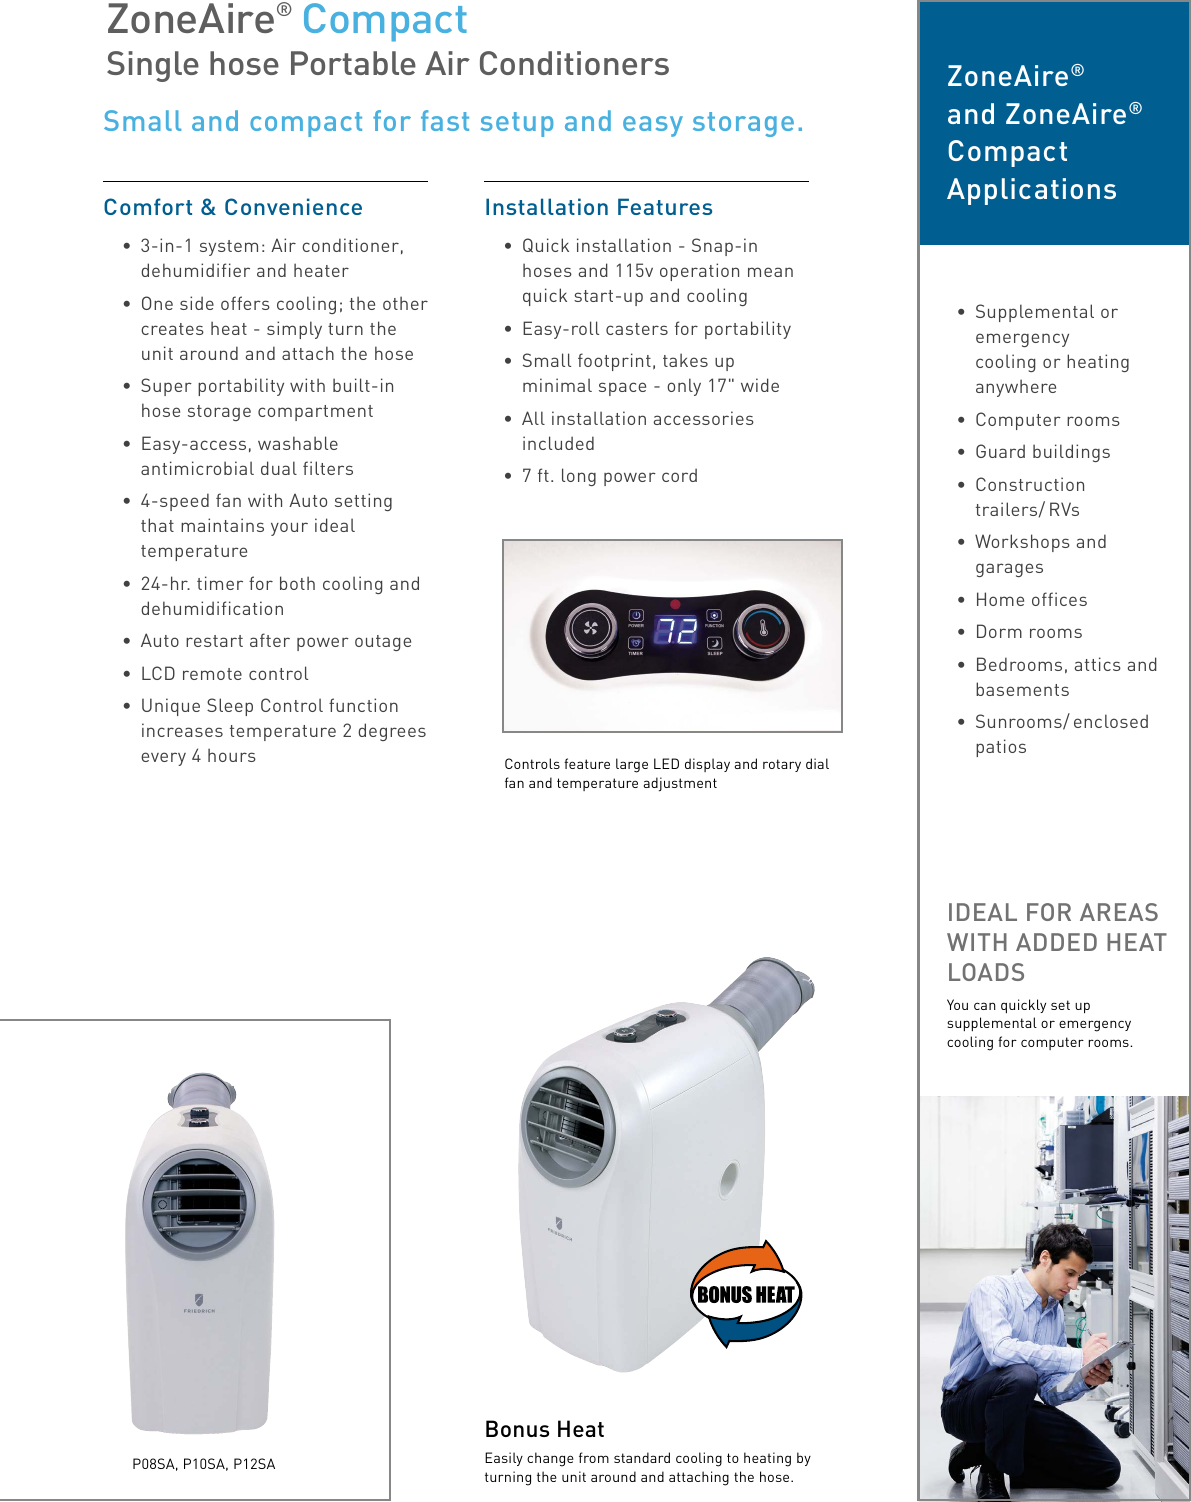 Page 3 of 4 - Friedrich  2019 Portable Air Conditioners Brochure Rev.1